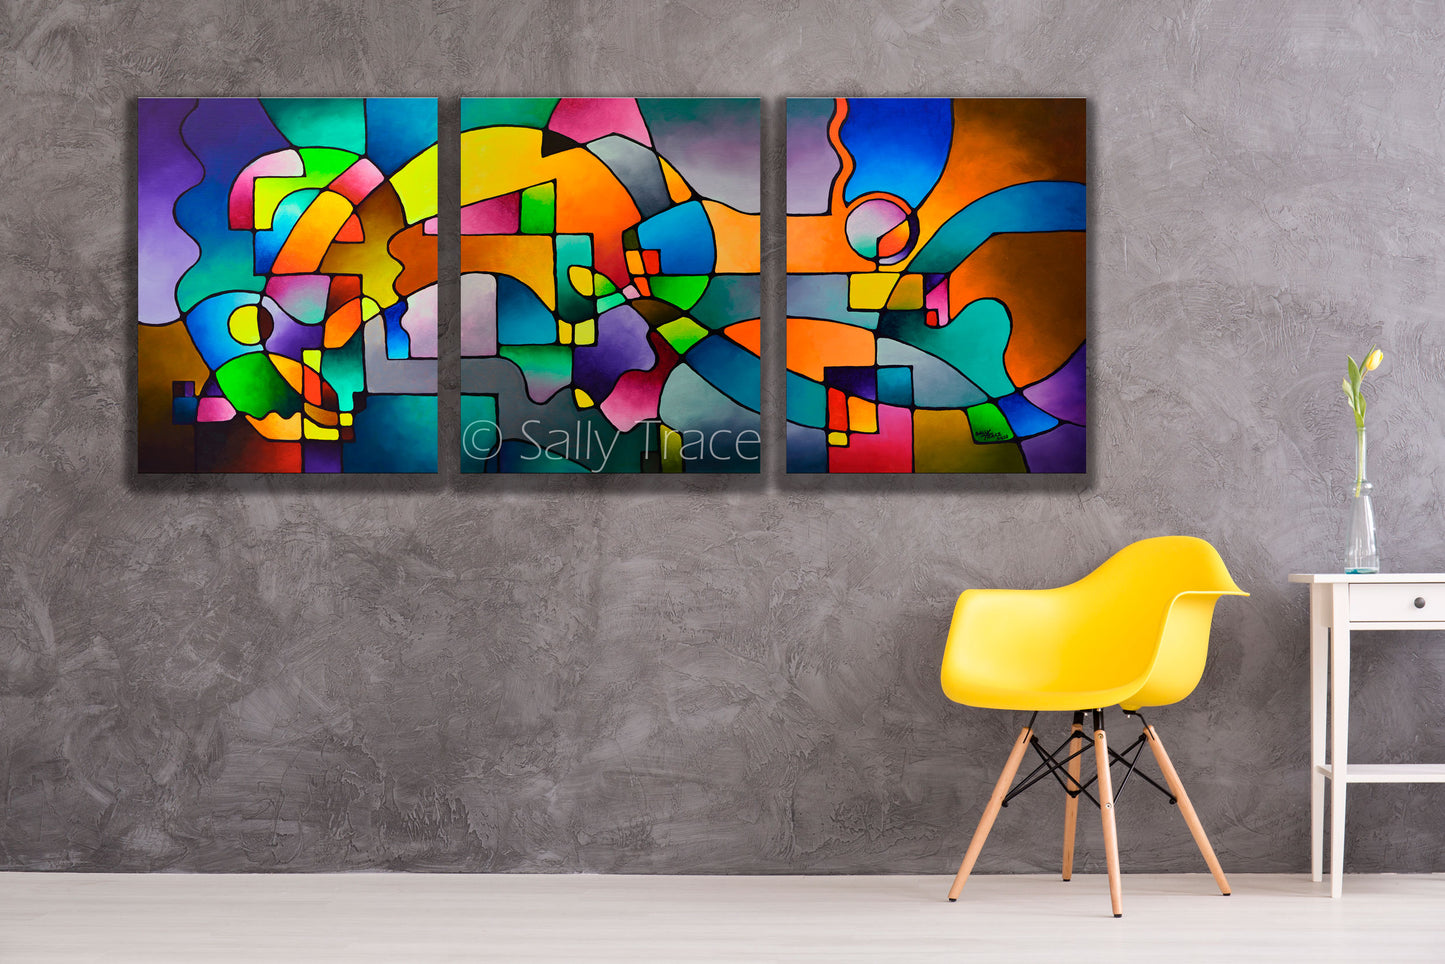 Modern art contemporary geometric acrylic painting triptych. Original abstract geometric painting commission "A Further Theory".  Oversized geometric wall art, Three acrylic paintings on gallery wrapped canvas with the sides painted black. Abstract acrylic mixed media painting. Modern art paintings for living room.